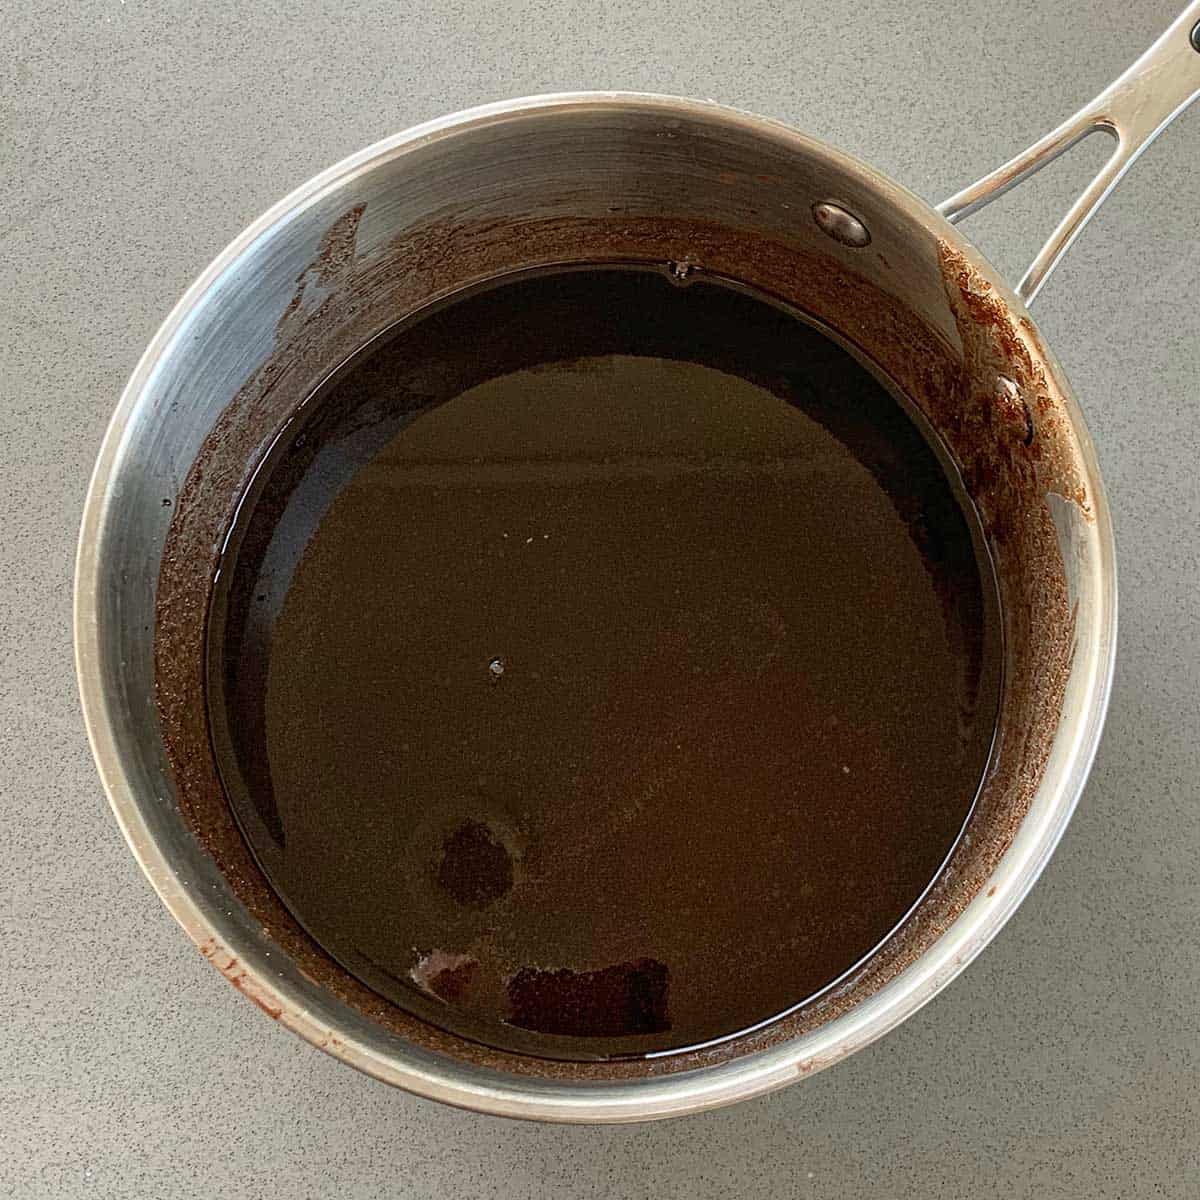 Melted chocolate in the bottom of a saucepan.